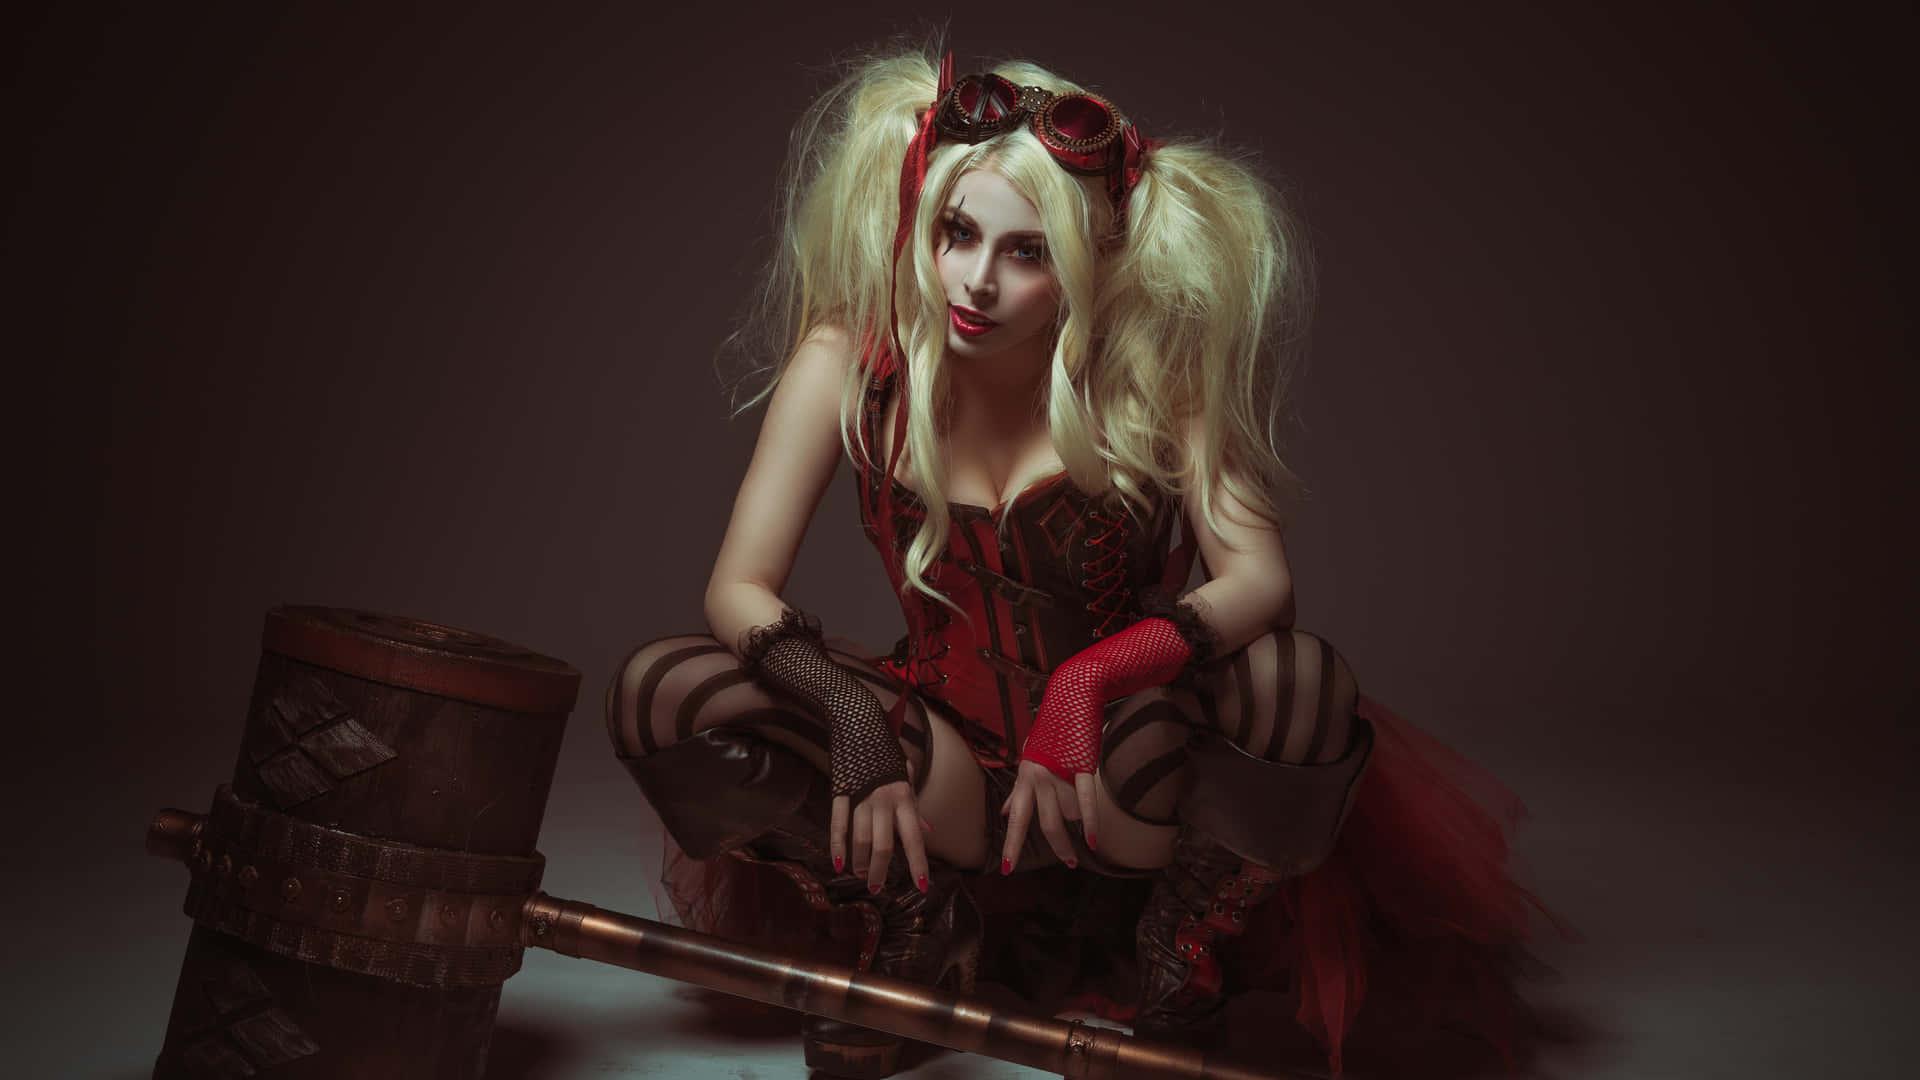 Stunning Harley Quinn Cosplay with a Fiery Twist Wallpaper